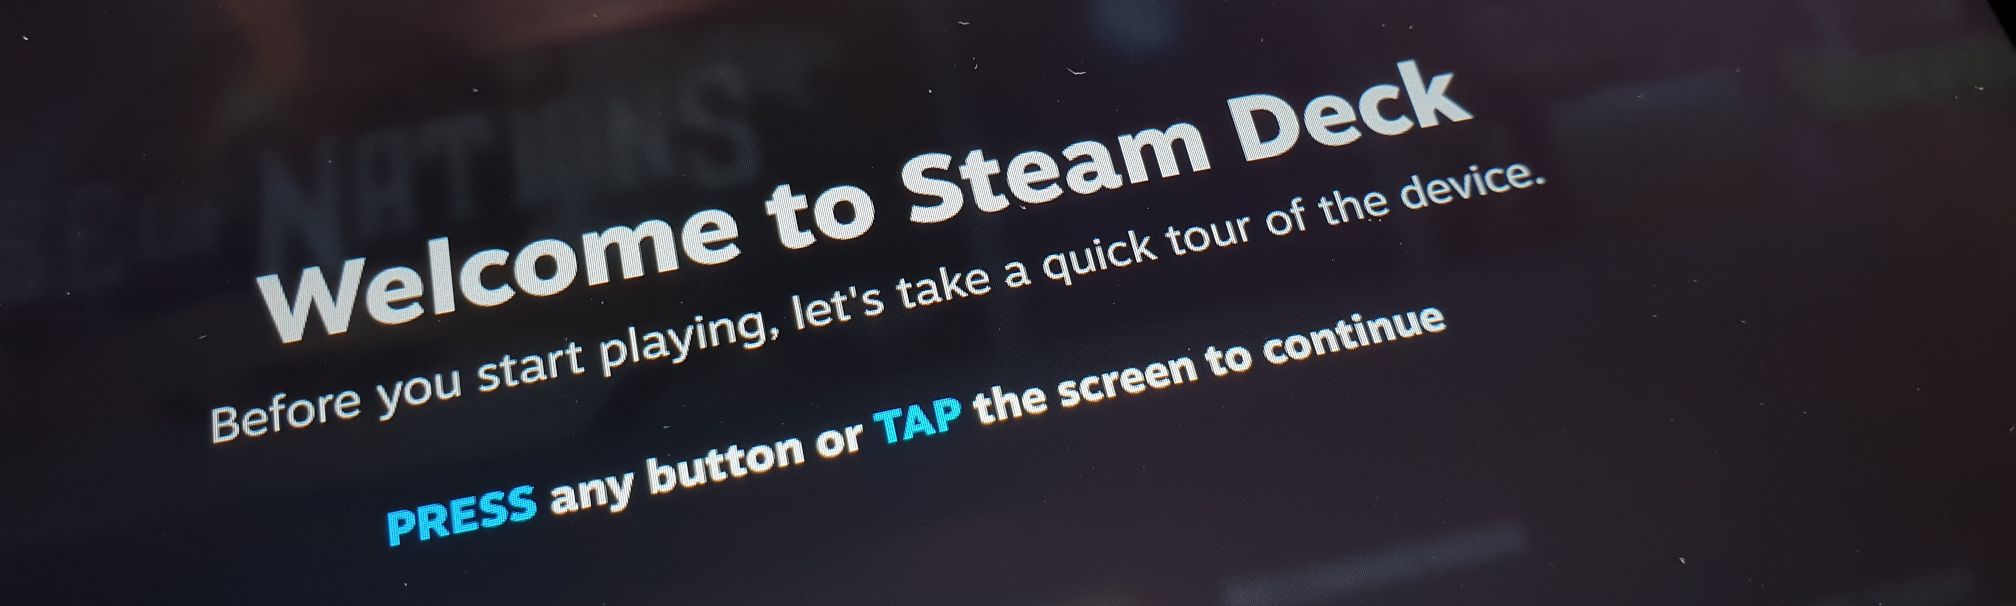 Welcome to Steam Deck